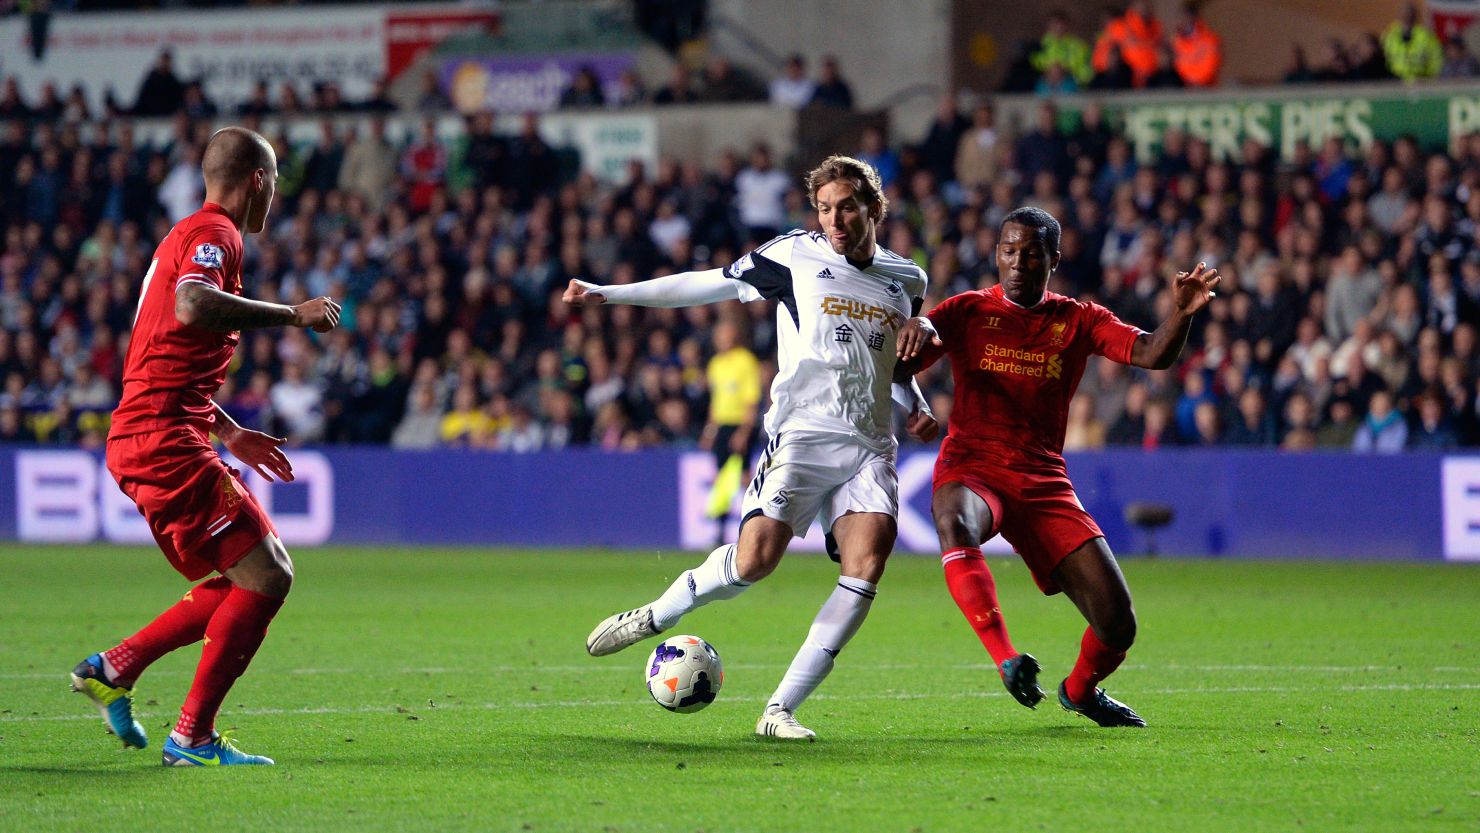 Swansea's Spanish striker Michu struck a second half equalizer to deny Liverpool victory.